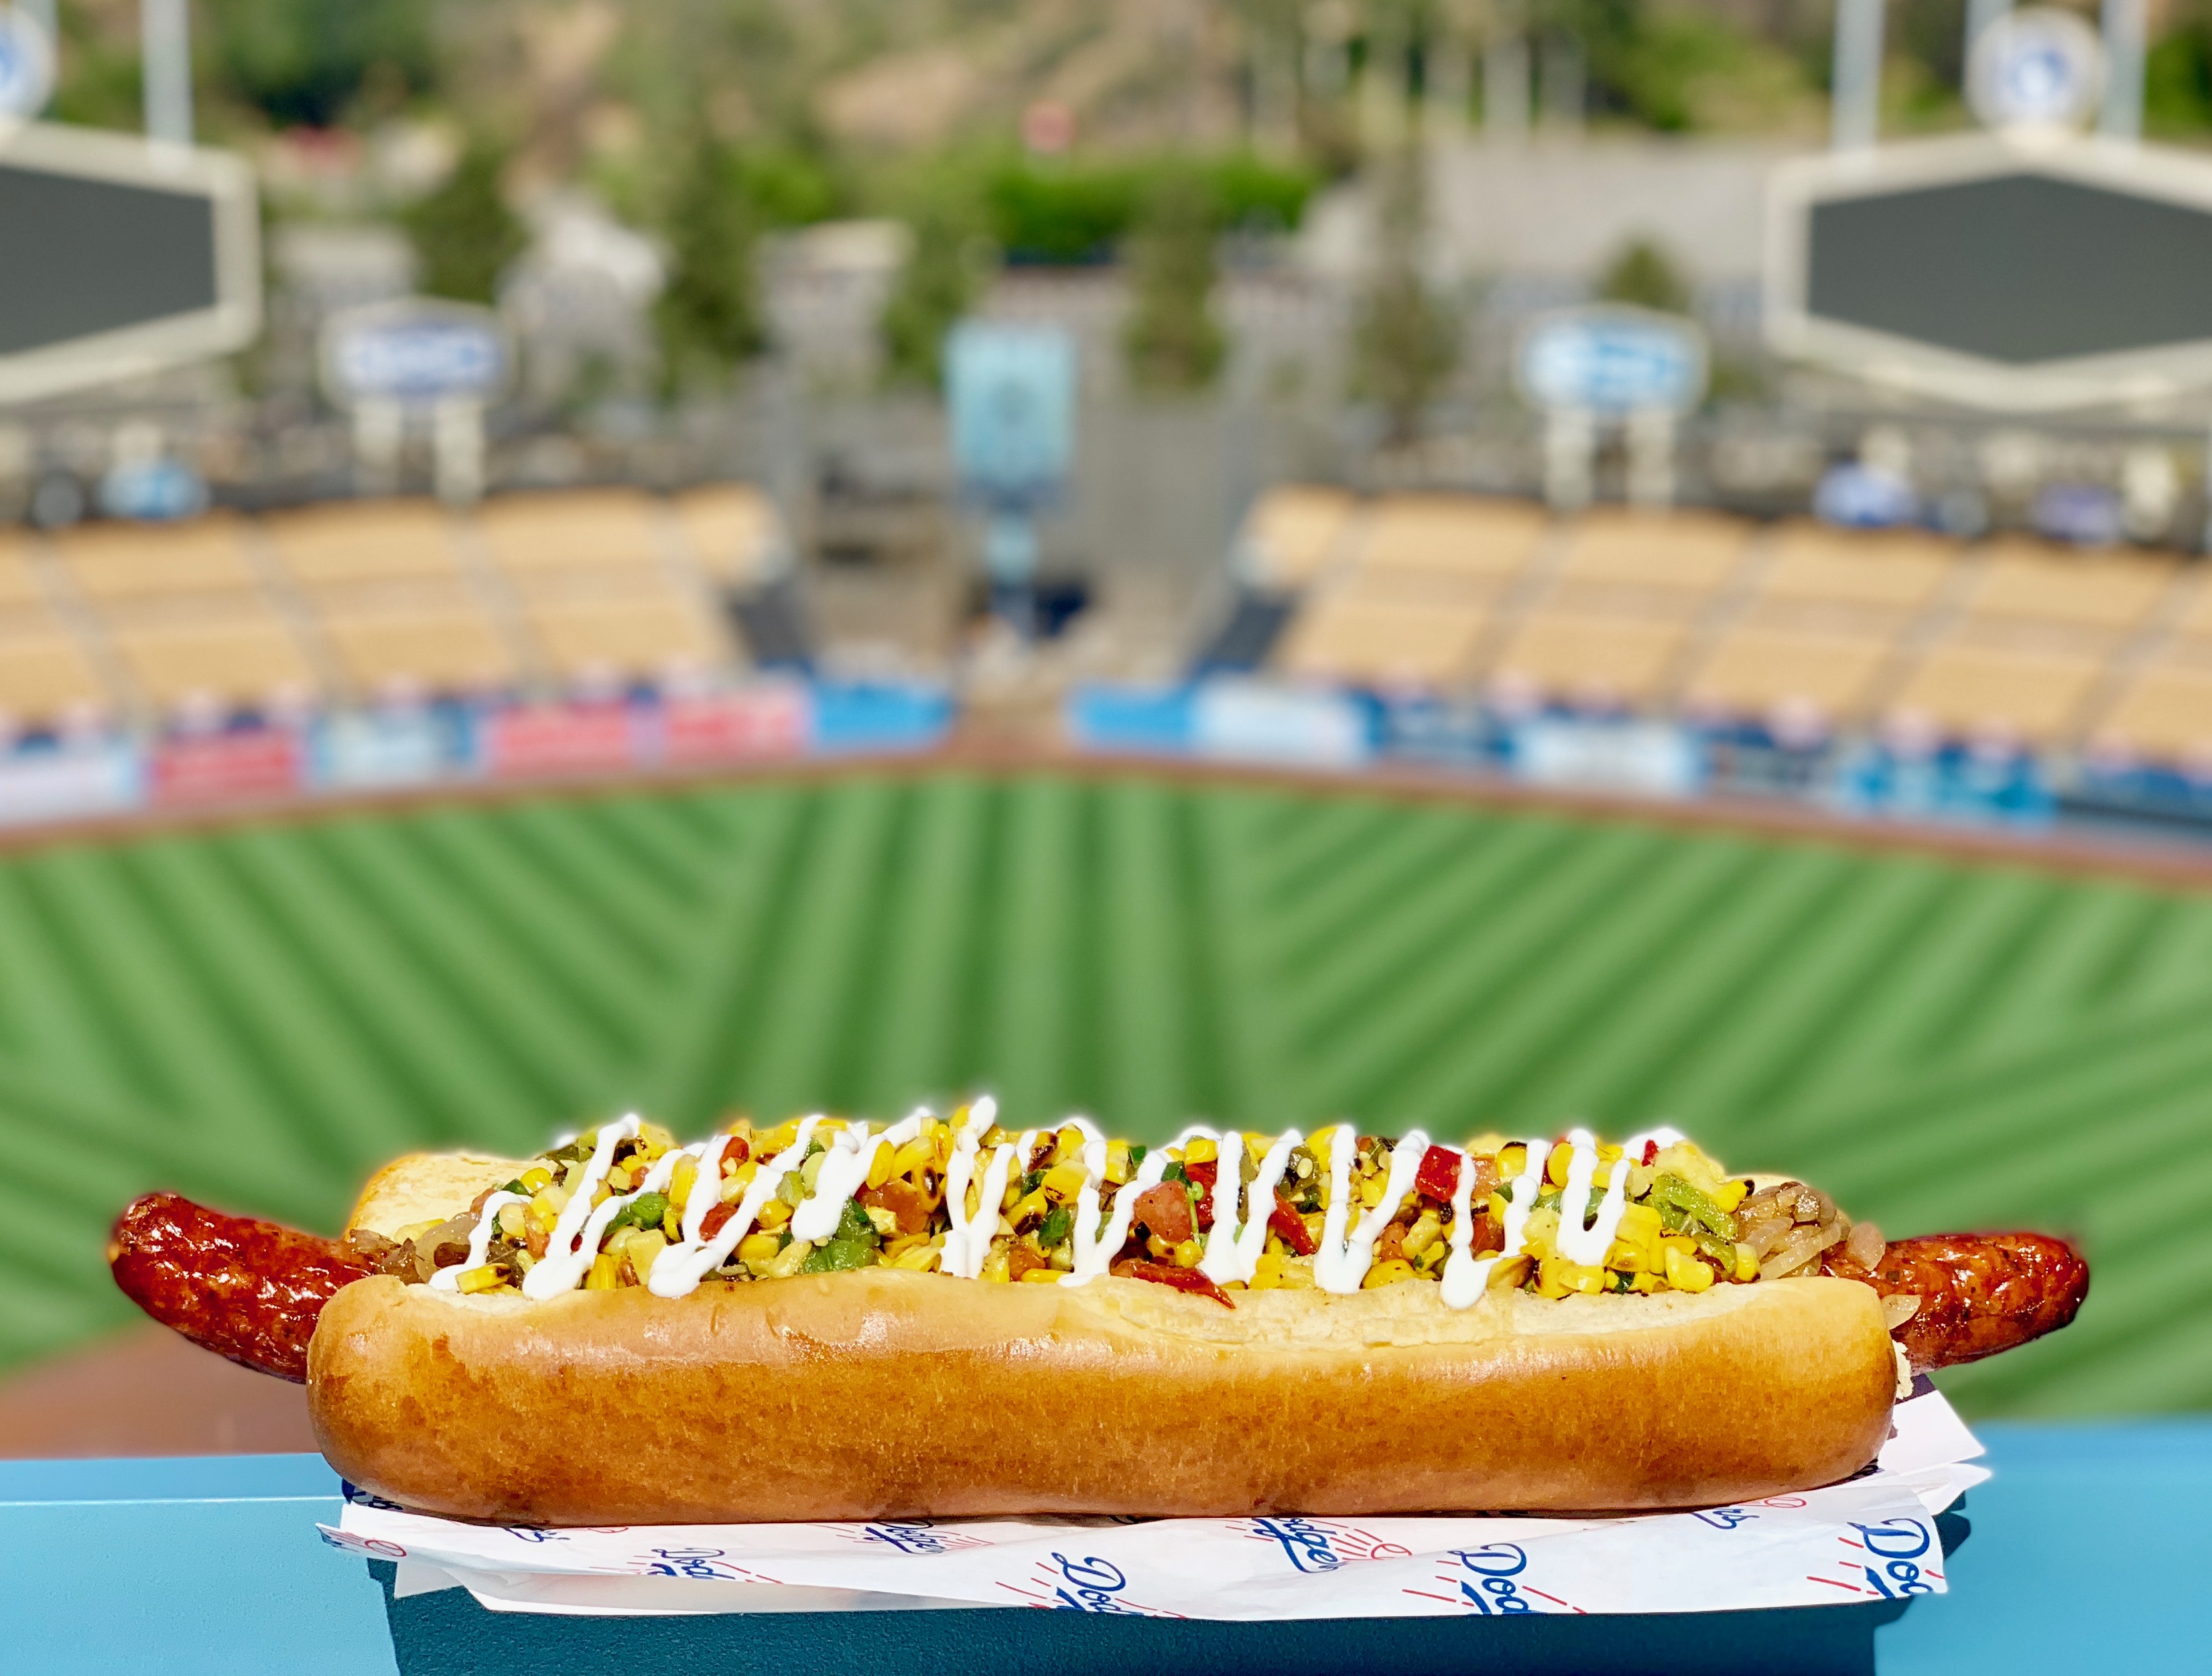 Ranking The 10 Craziest Ballpark Foods For The 2019 Mlb Season